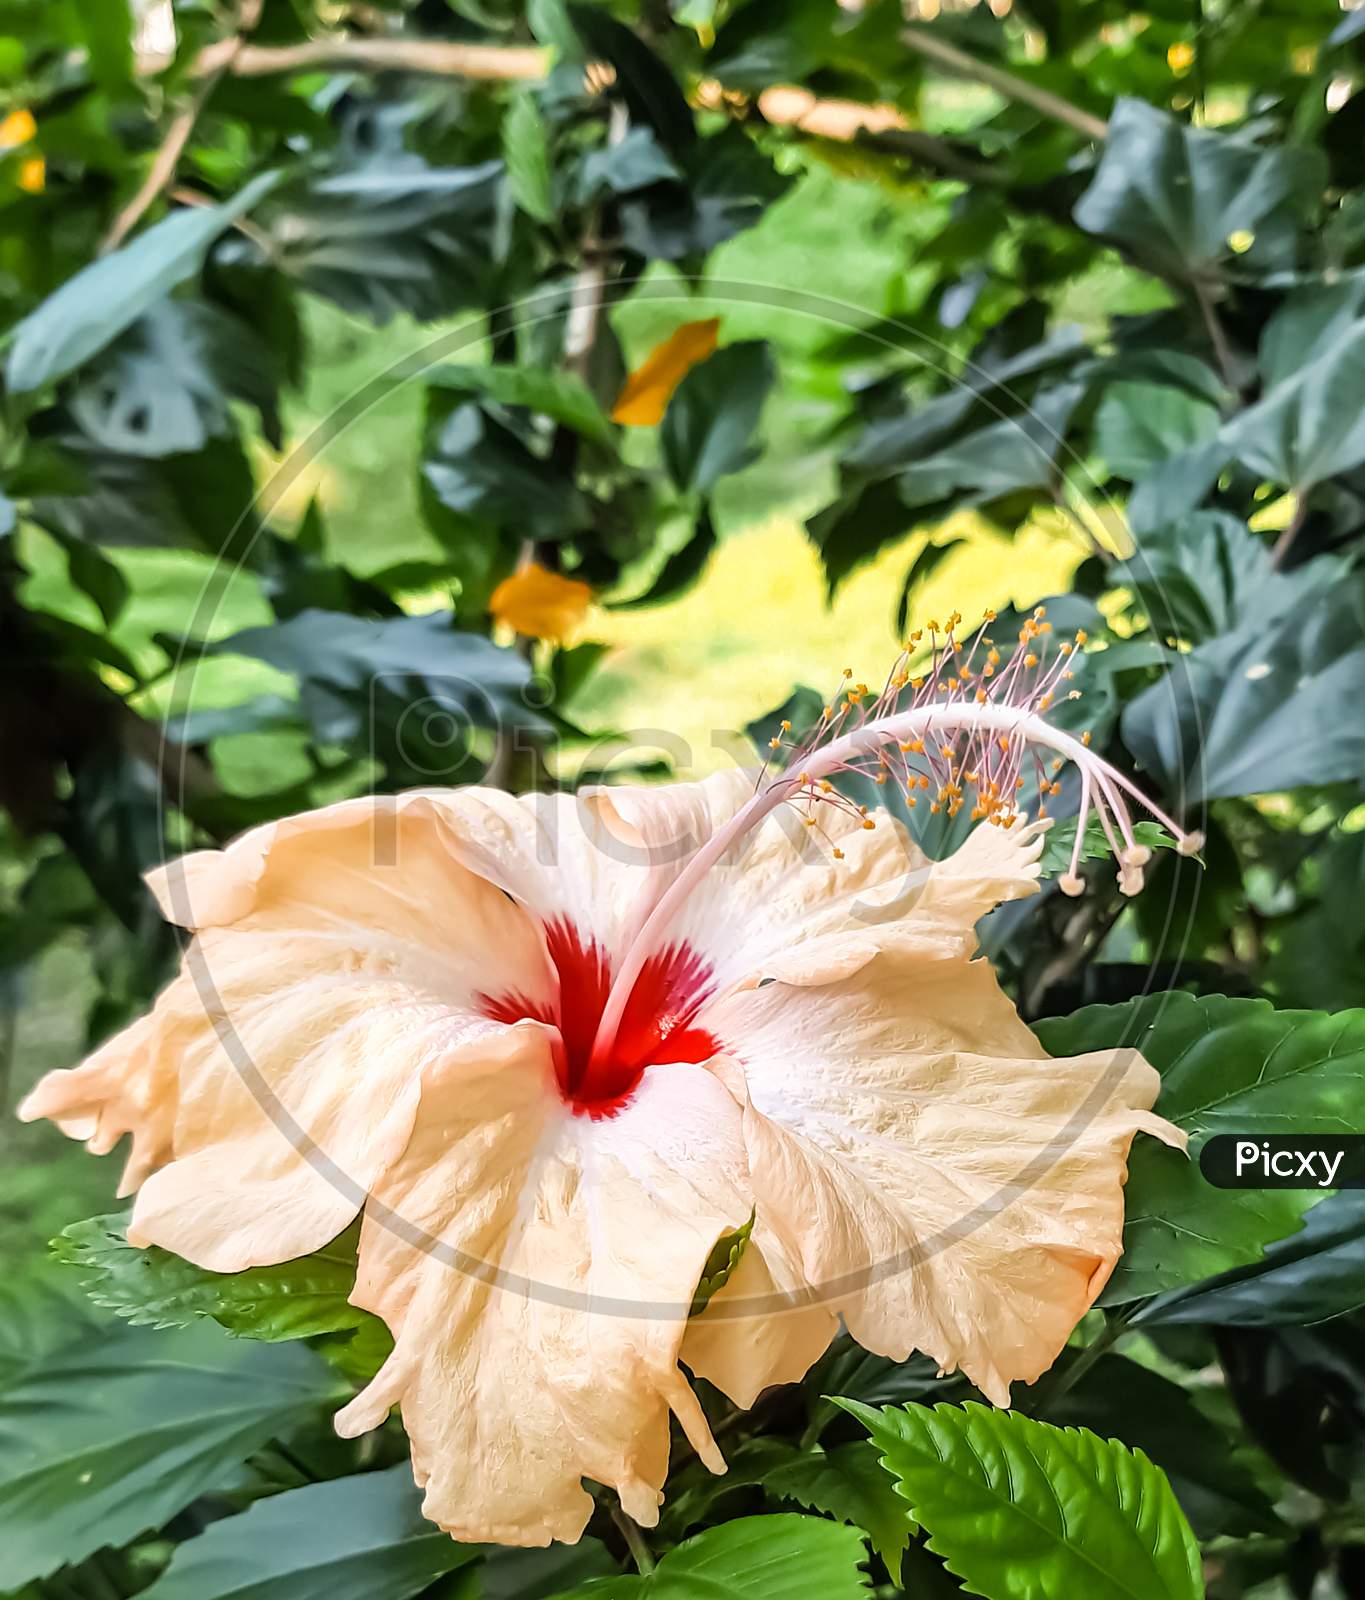 Hibiscus Is A Genus Of Flowering Plants In The Mallow Family, The Genus Is Quite Large.